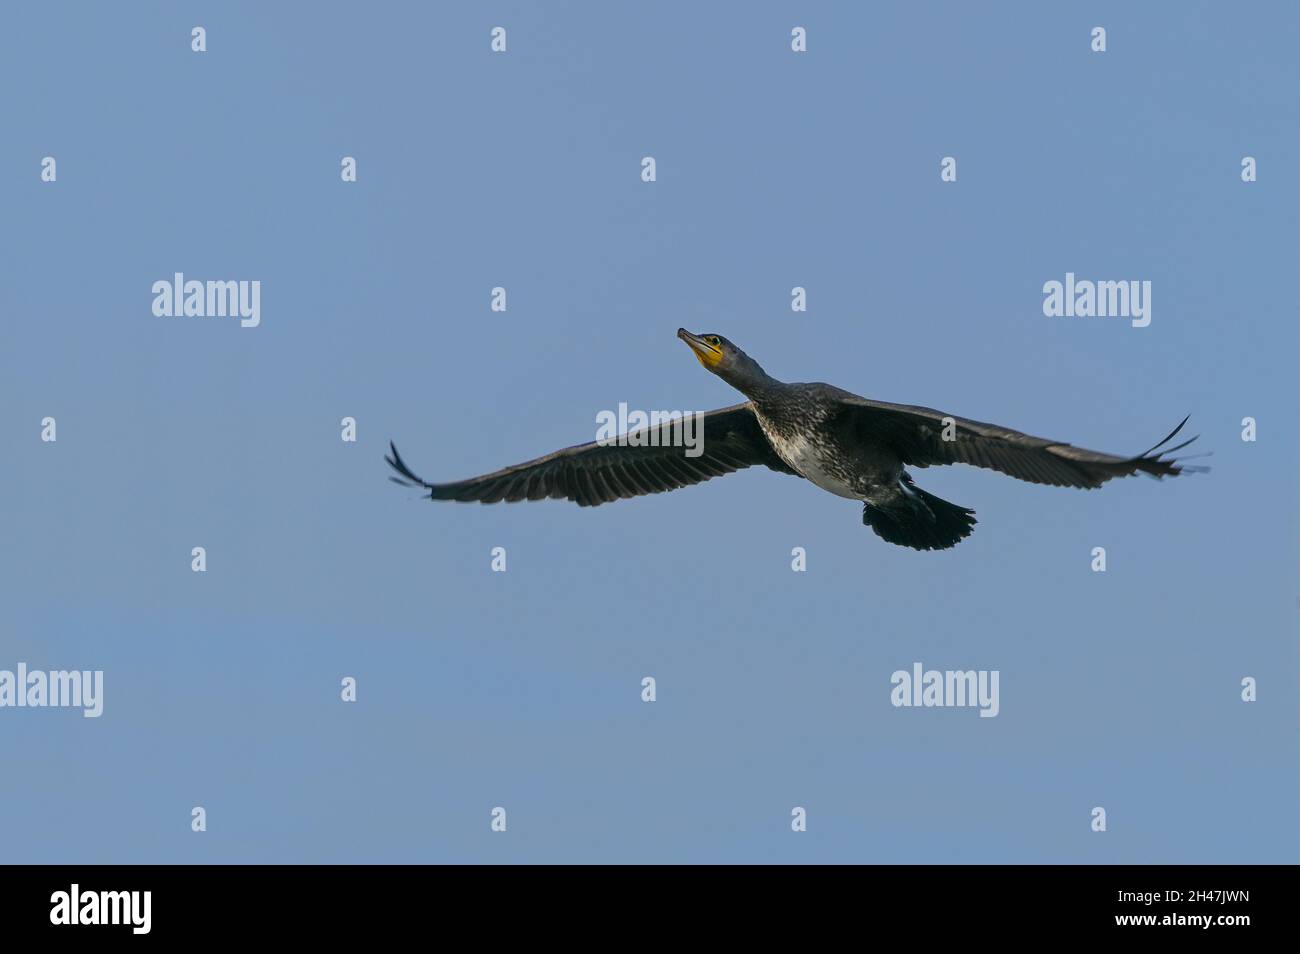 Flying great cormorant bird (Phalacrocorax carbo), the black seabird feeds on fish caught through diving, blue sky with copy space, selected focus, mo Stock Photo